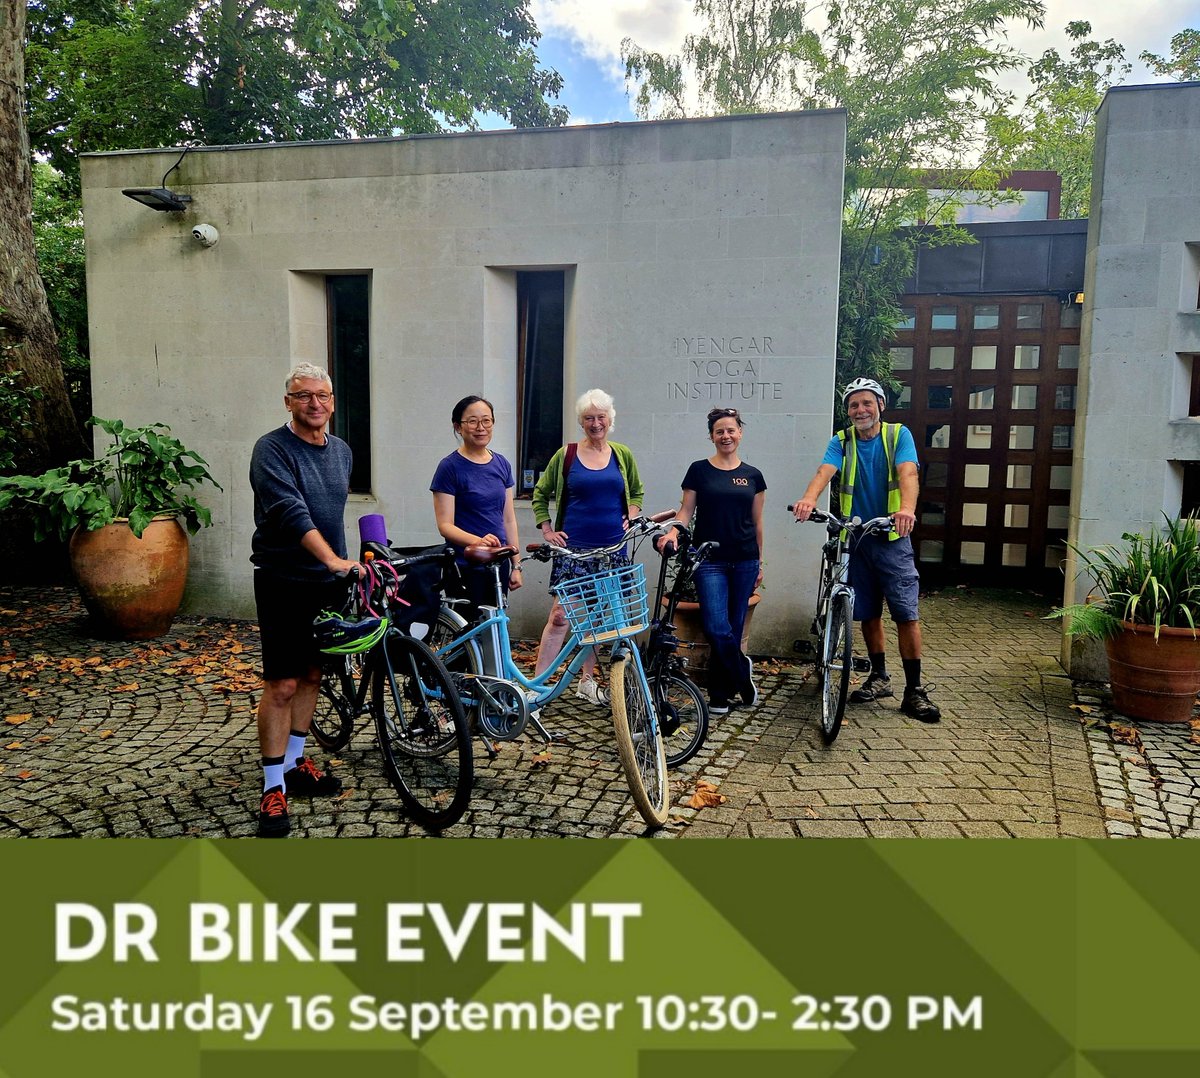 This Saturday! #iyengaryogalondon Dr Bike is returning to our Maida Vale studio for our annual Active-Travel Community Event. #drbike Join us for a FREE health check on your bike. Saturday 16 September 10.30am - 2.30pm 223a Randolph Avenue W9 1NL @CycleConfident